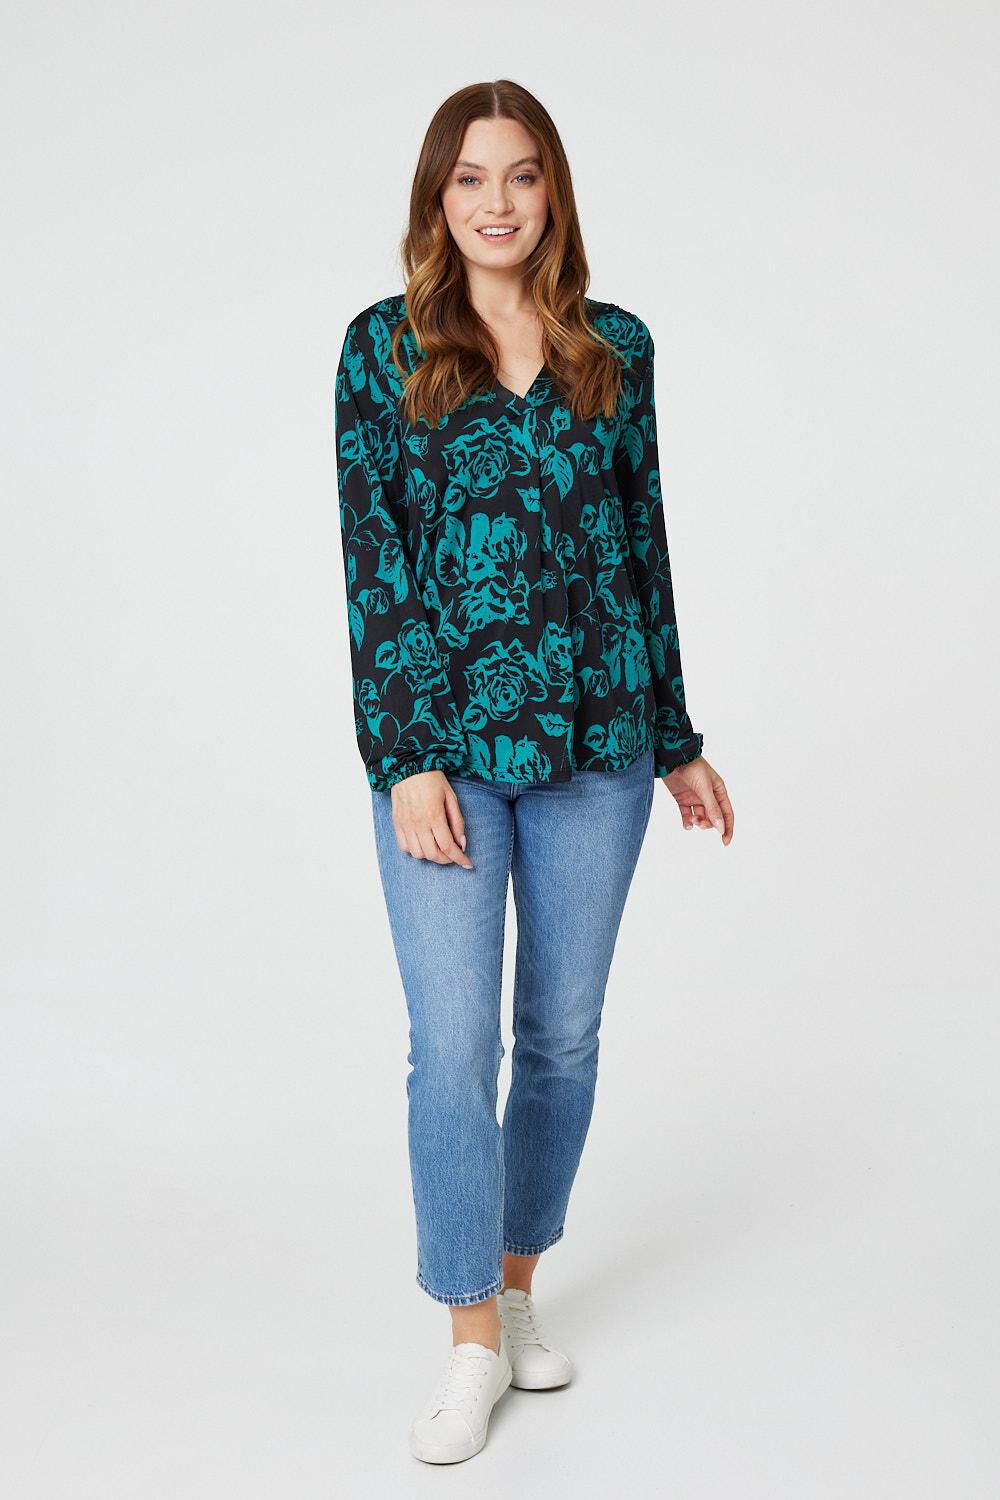 Izabel London Women’s Green and Black Floral Print Long Sleeve Relaxed Blouse, Size: 12